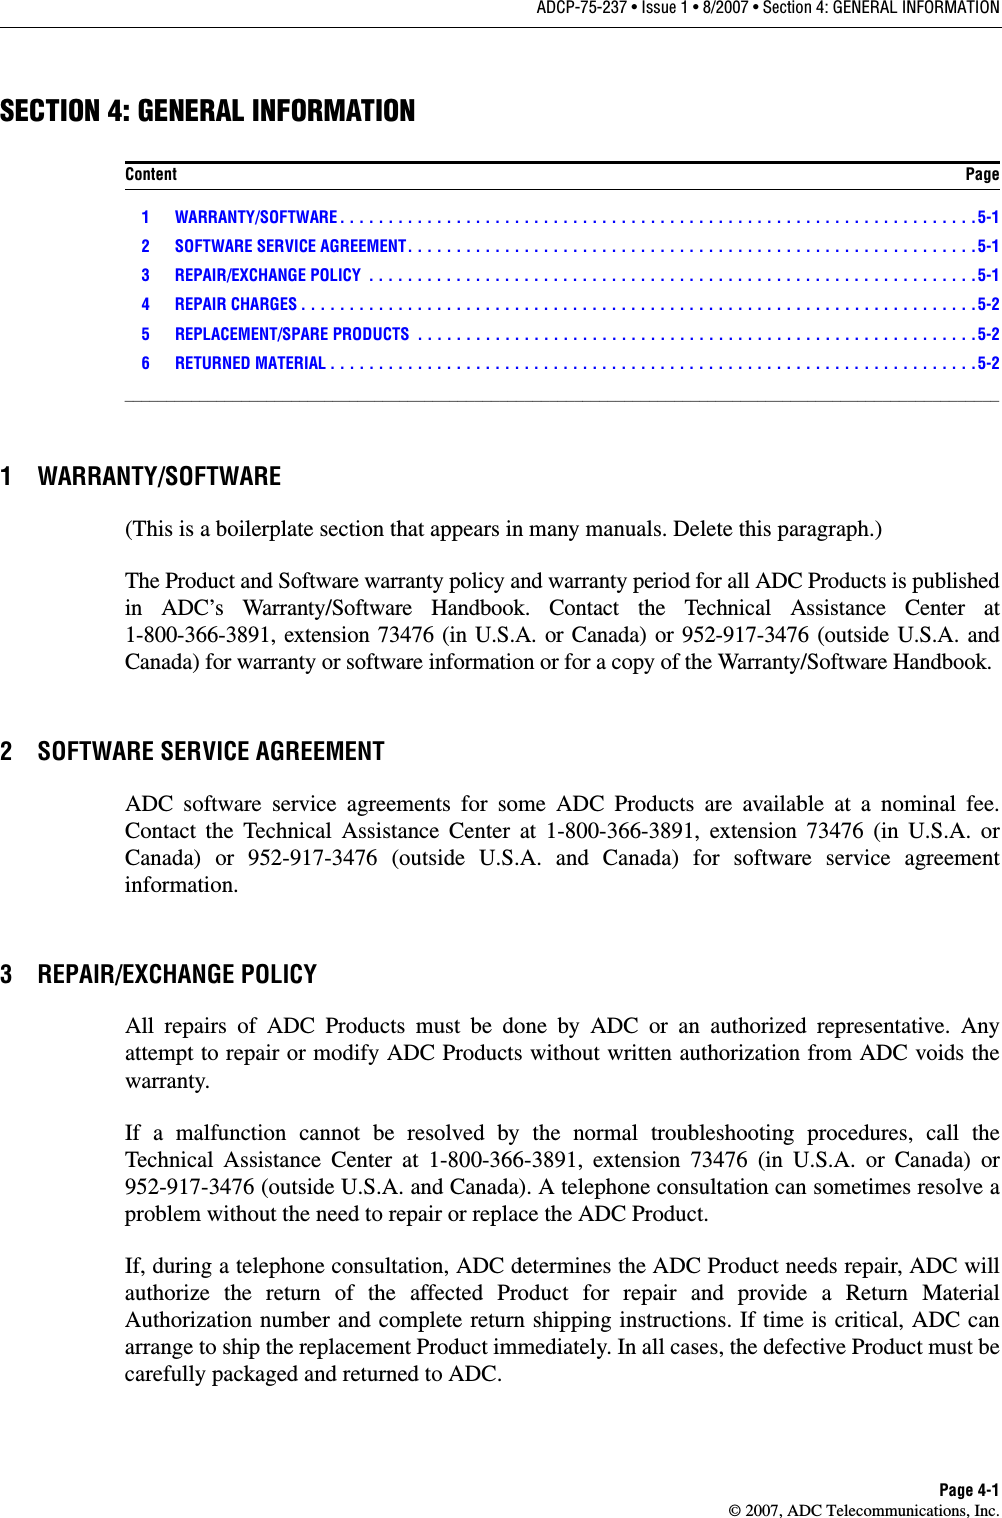 ADCP-75-237 • Issue 1 • 8/2007 • Section 4: GENERAL INFORMATIONPage 4-1© 2007, ADC Telecommunications, Inc.SECTION 4: GENERAL INFORMATIONContent Page1 WARRANTY/SOFTWARE . . . . . . . . . . . . . . . . . . . . . . . . . . . . . . . . . . . . . . . . . . . . . . . . . . . . . . . . . . . . . . . . . .5-12 SOFTWARE SERVICE AGREEMENT. . . . . . . . . . . . . . . . . . . . . . . . . . . . . . . . . . . . . . . . . . . . . . . . . . . . . . . . . . .5-13 REPAIR/EXCHANGE POLICY  . . . . . . . . . . . . . . . . . . . . . . . . . . . . . . . . . . . . . . . . . . . . . . . . . . . . . . . . . . . . . . .5-14 REPAIR CHARGES . . . . . . . . . . . . . . . . . . . . . . . . . . . . . . . . . . . . . . . . . . . . . . . . . . . . . . . . . . . . . . . . . . . . . .5-25 REPLACEMENT/SPARE PRODUCTS  . . . . . . . . . . . . . . . . . . . . . . . . . . . . . . . . . . . . . . . . . . . . . . . . . . . . . . . . . .5-26 RETURNED MATERIAL . . . . . . . . . . . . . . . . . . . . . . . . . . . . . . . . . . . . . . . . . . . . . . . . . . . . . . . . . . . . . . . . . . .5-2_________________________________________________________________________________________________________1 WARRANTY/SOFTWARE(This is a boilerplate section that appears in many manuals. Delete this paragraph.)The Product and Software warranty policy and warranty period for all ADC Products is published in ADC’s Warranty/Software Handbook. Contact the Technical Assistance Center at 1-800-366-3891, extension 73476 (in U.S.A. or Canada) or 952-917-3476 (outside U.S.A. and Canada) for warranty or software information or for a copy of the Warranty/Software Handbook.2 SOFTWARE SERVICE AGREEMENTADC software service agreements for some ADC Products are available at a nominal fee. Contact the Technical Assistance Center at 1-800-366-3891, extension 73476 (in U.S.A. or Canada) or 952-917-3476 (outside U.S.A. and Canada) for software service agreement information.3 REPAIR/EXCHANGE POLICYAll repairs of ADC Products must be done by ADC or an authorized representative. Any attempt to repair or modify ADC Products without written authorization from ADC voids the warranty.If a malfunction cannot be resolved by the normal troubleshooting procedures, call the Technical Assistance Center at 1-800-366-3891, extension 73476 (in U.S.A. or Canada) or 952-917-3476 (outside U.S.A. and Canada). A telephone consultation can sometimes resolve a problem without the need to repair or replace the ADC Product.If, during a telephone consultation, ADC determines the ADC Product needs repair, ADC will authorize the return of the affected Product for repair and provide a Return Material Authorization number and complete return shipping instructions. If time is critical, ADC can arrange to ship the replacement Product immediately. In all cases, the defective Product must be carefully packaged and returned to ADC.